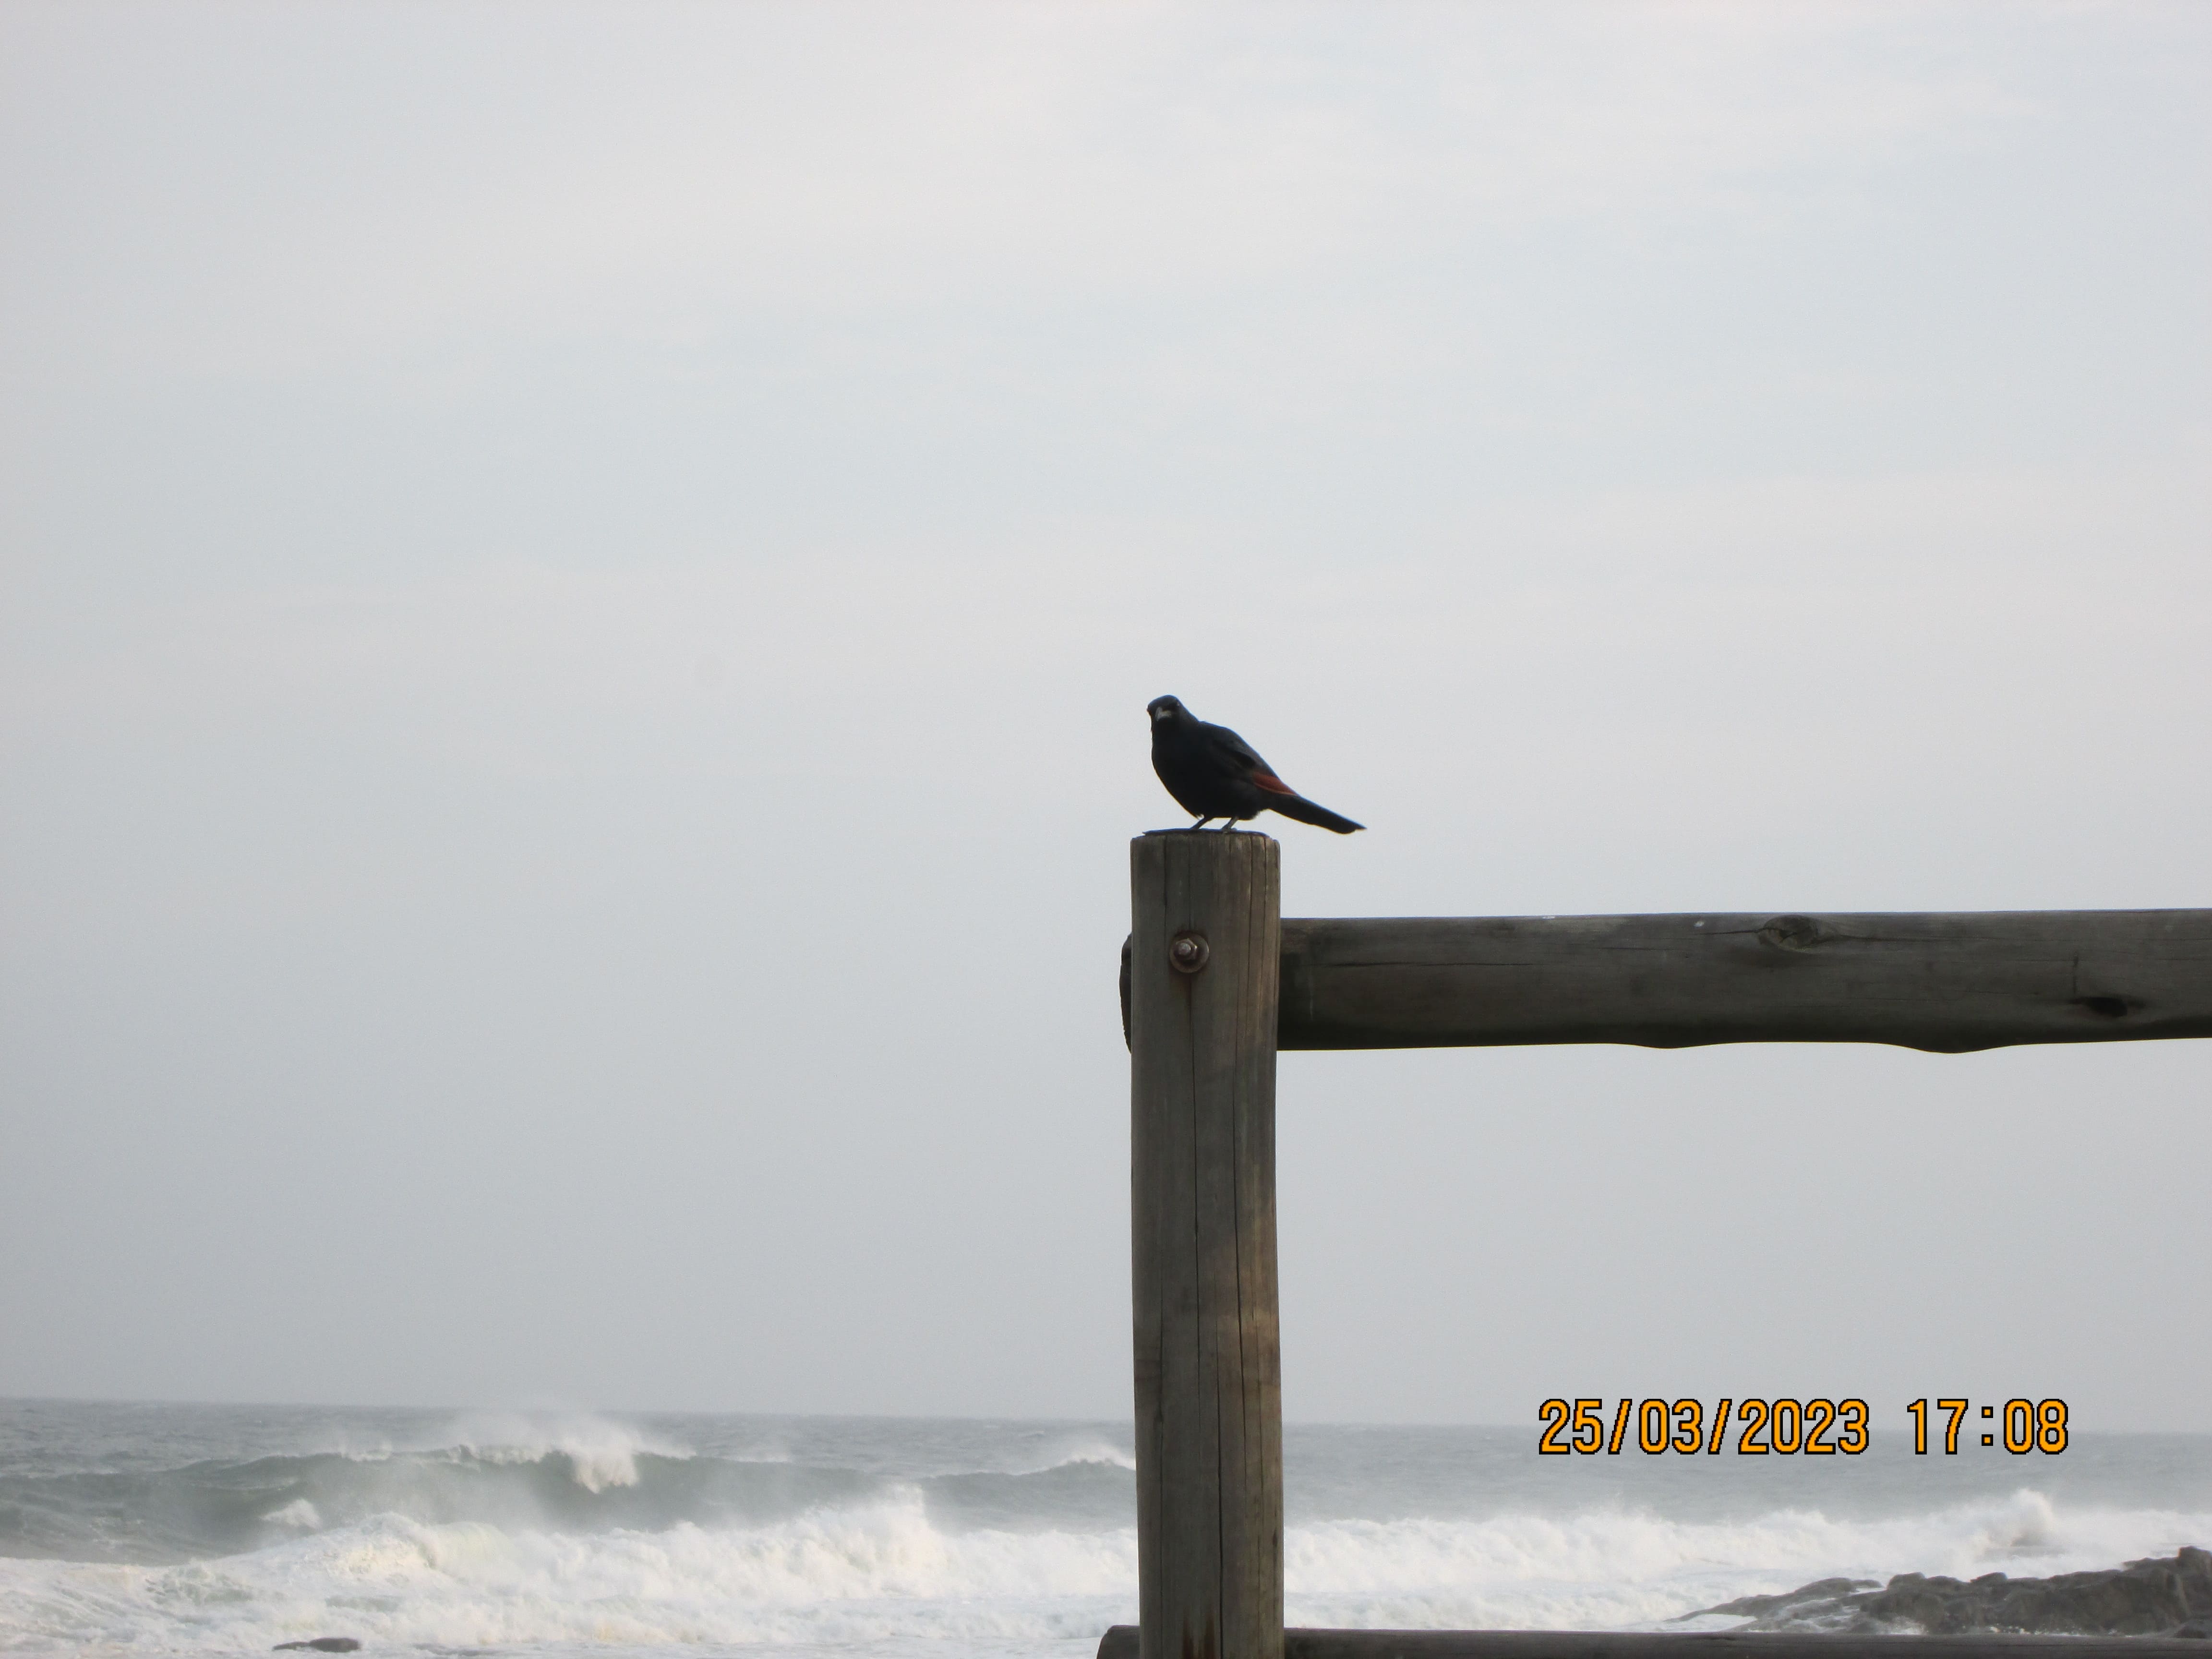 a single bird in a wooden railing on the backdrop of a blue sky